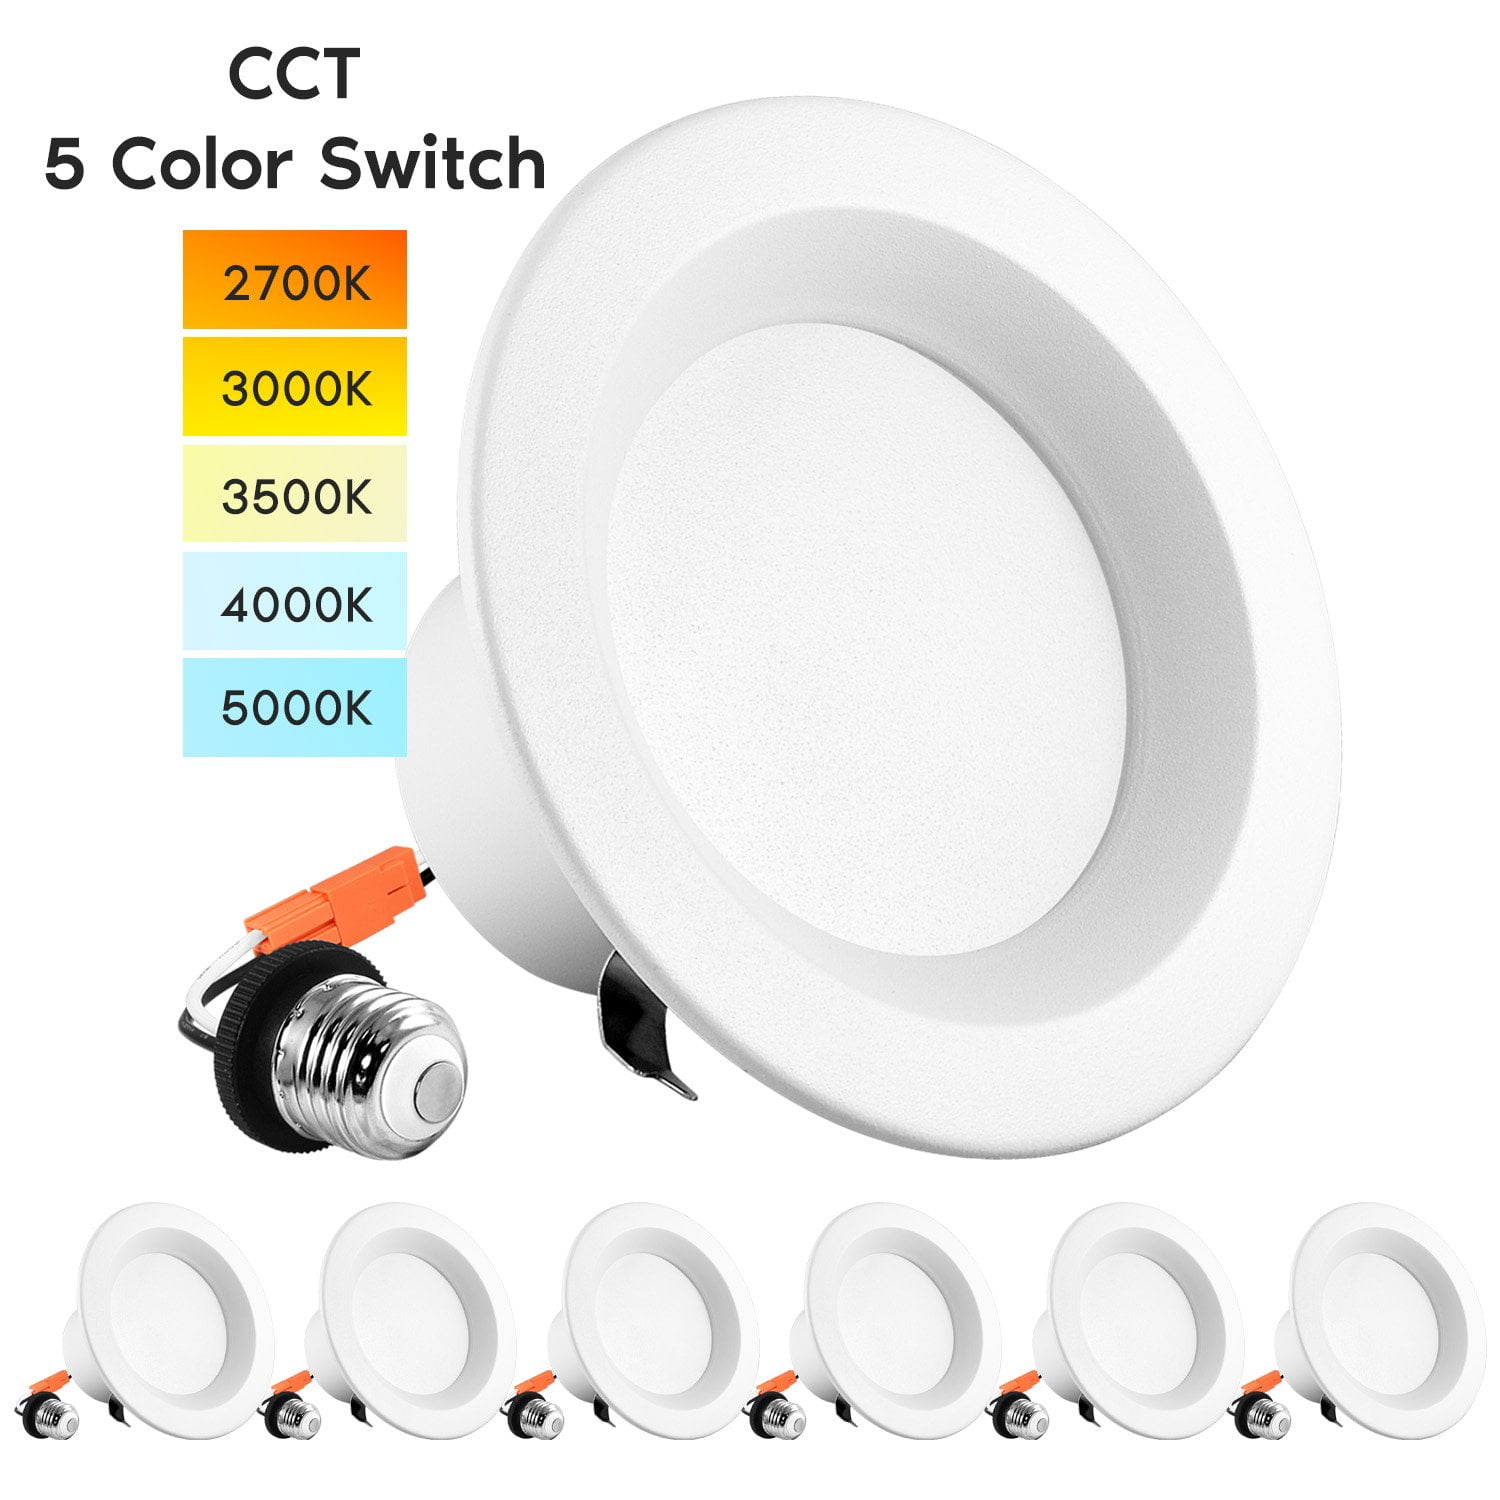 750LM 120W Equivalent Recessed Down Light 16 Pack 11 Watt 5/6 Recessed Light LED Retrofit Can Downlight Dimmable Lighting Fixture 3000K Warm White LED Ceiling Light 